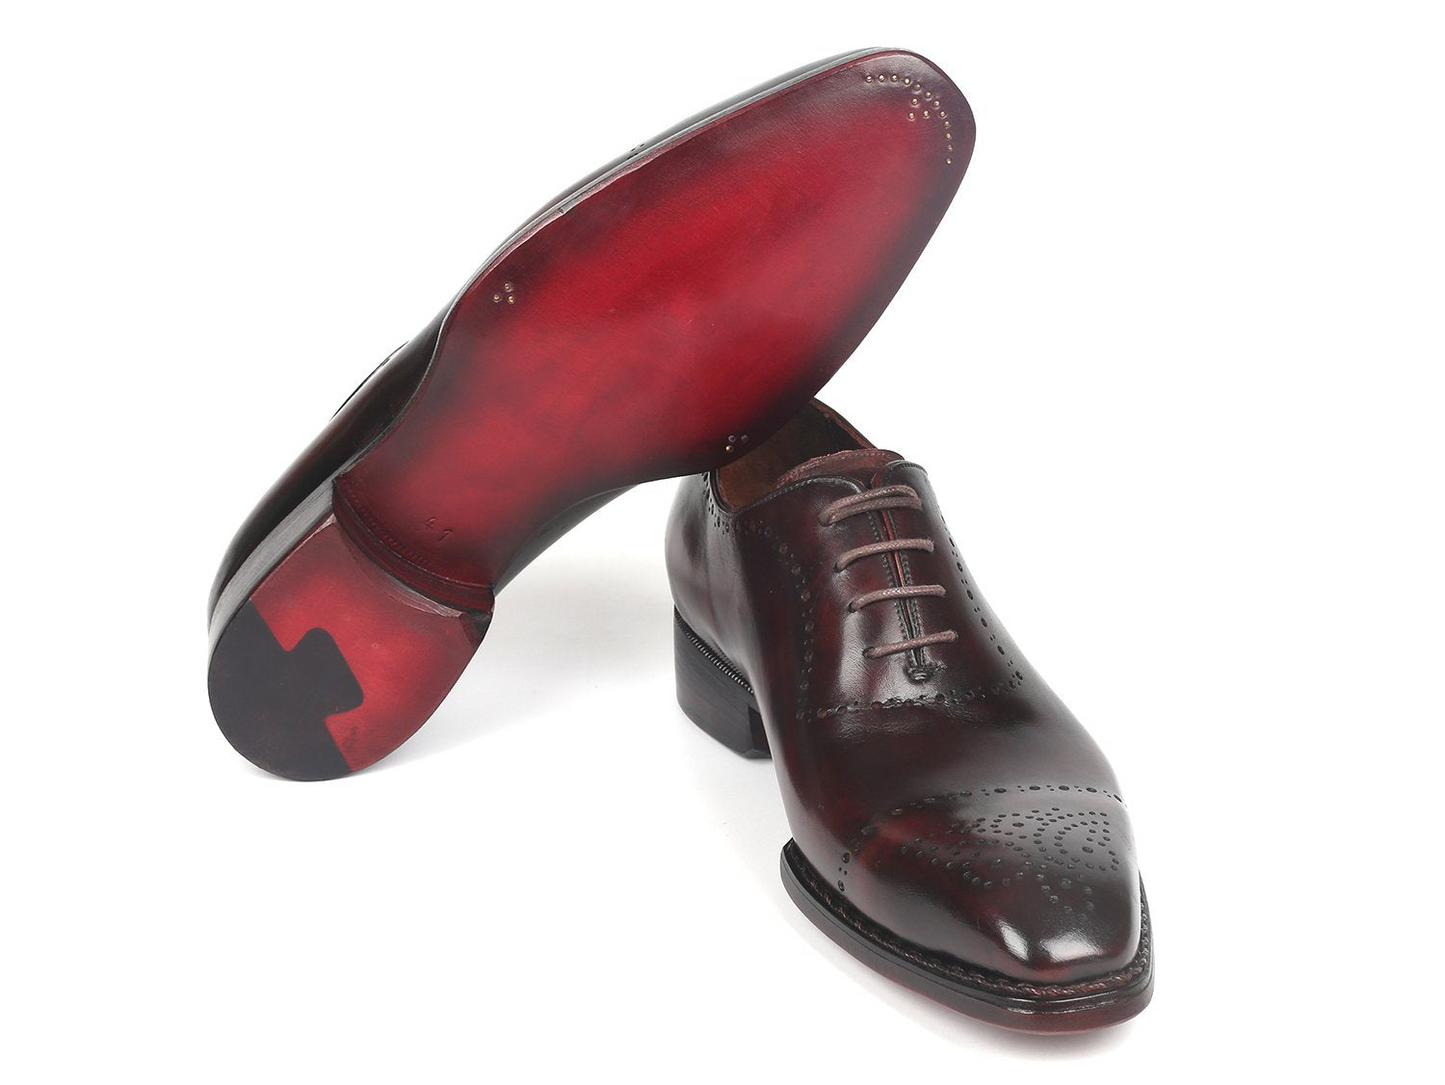 Dark Bordeaux Goodyear Welted Oxfords, Handmade to order.